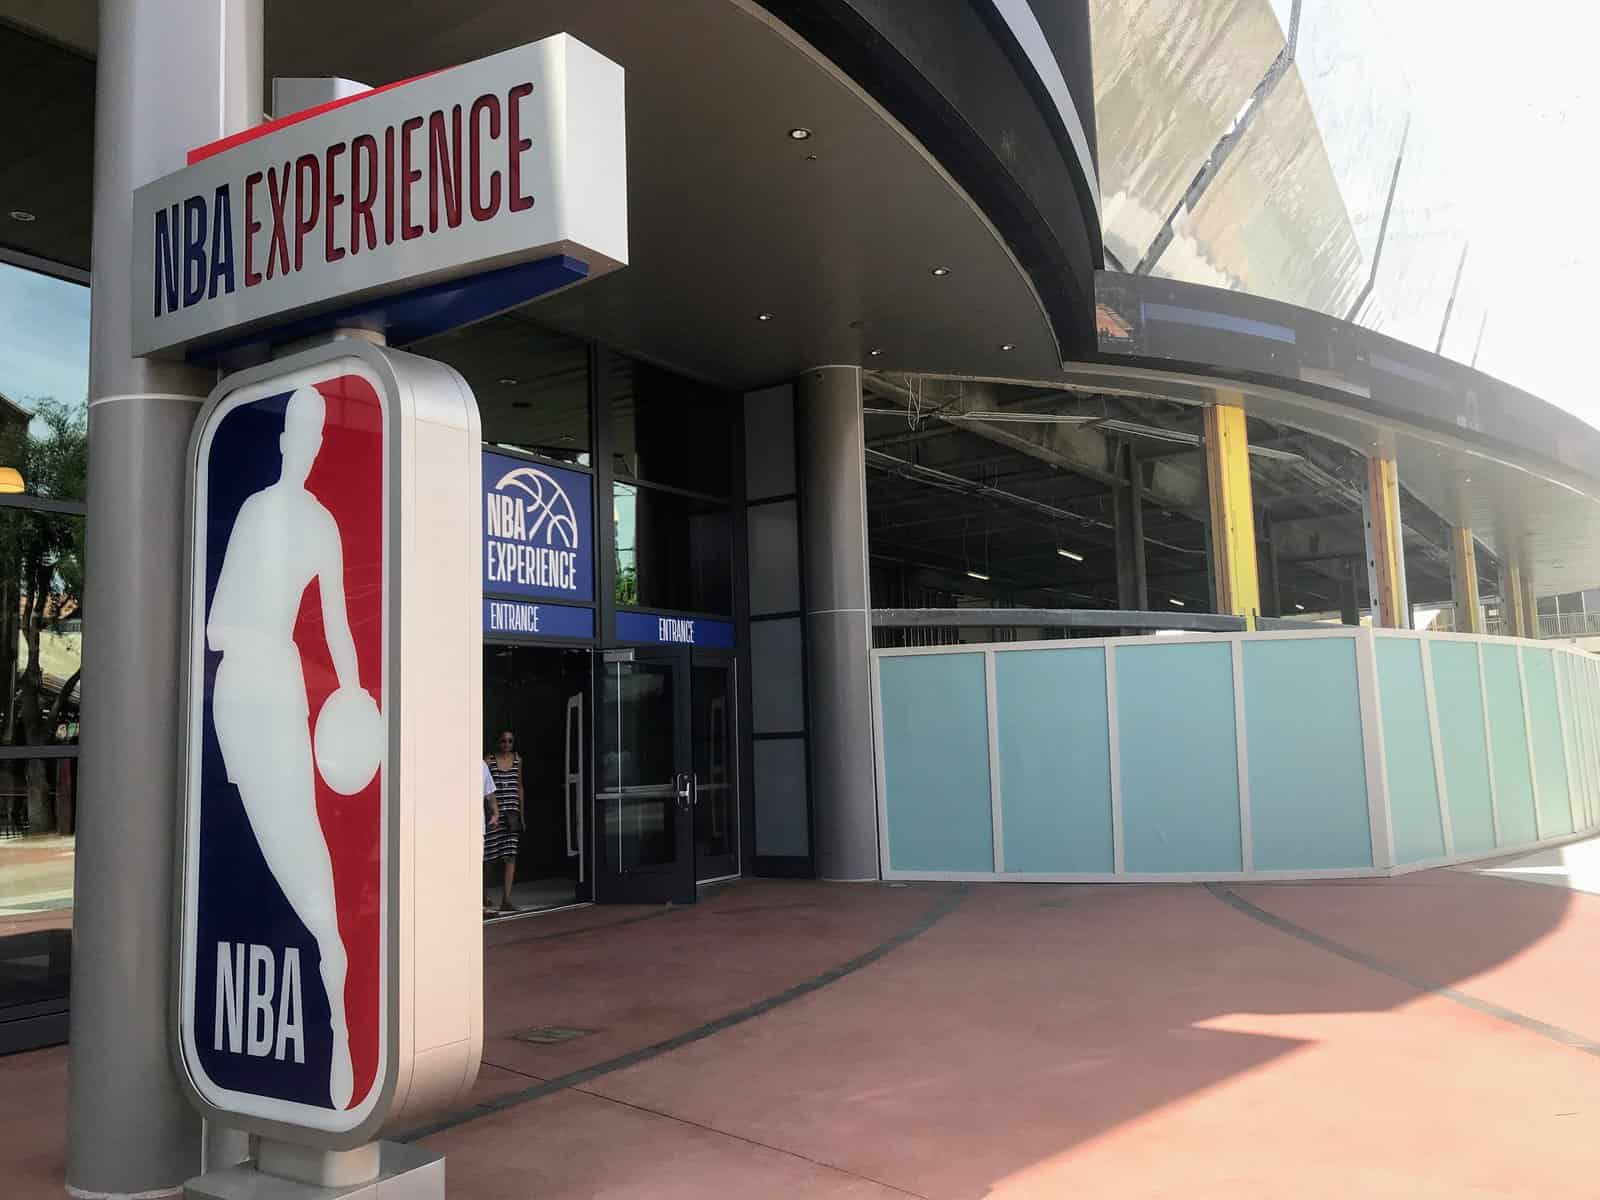 What to expect at the NBA Experience at Disney Springs